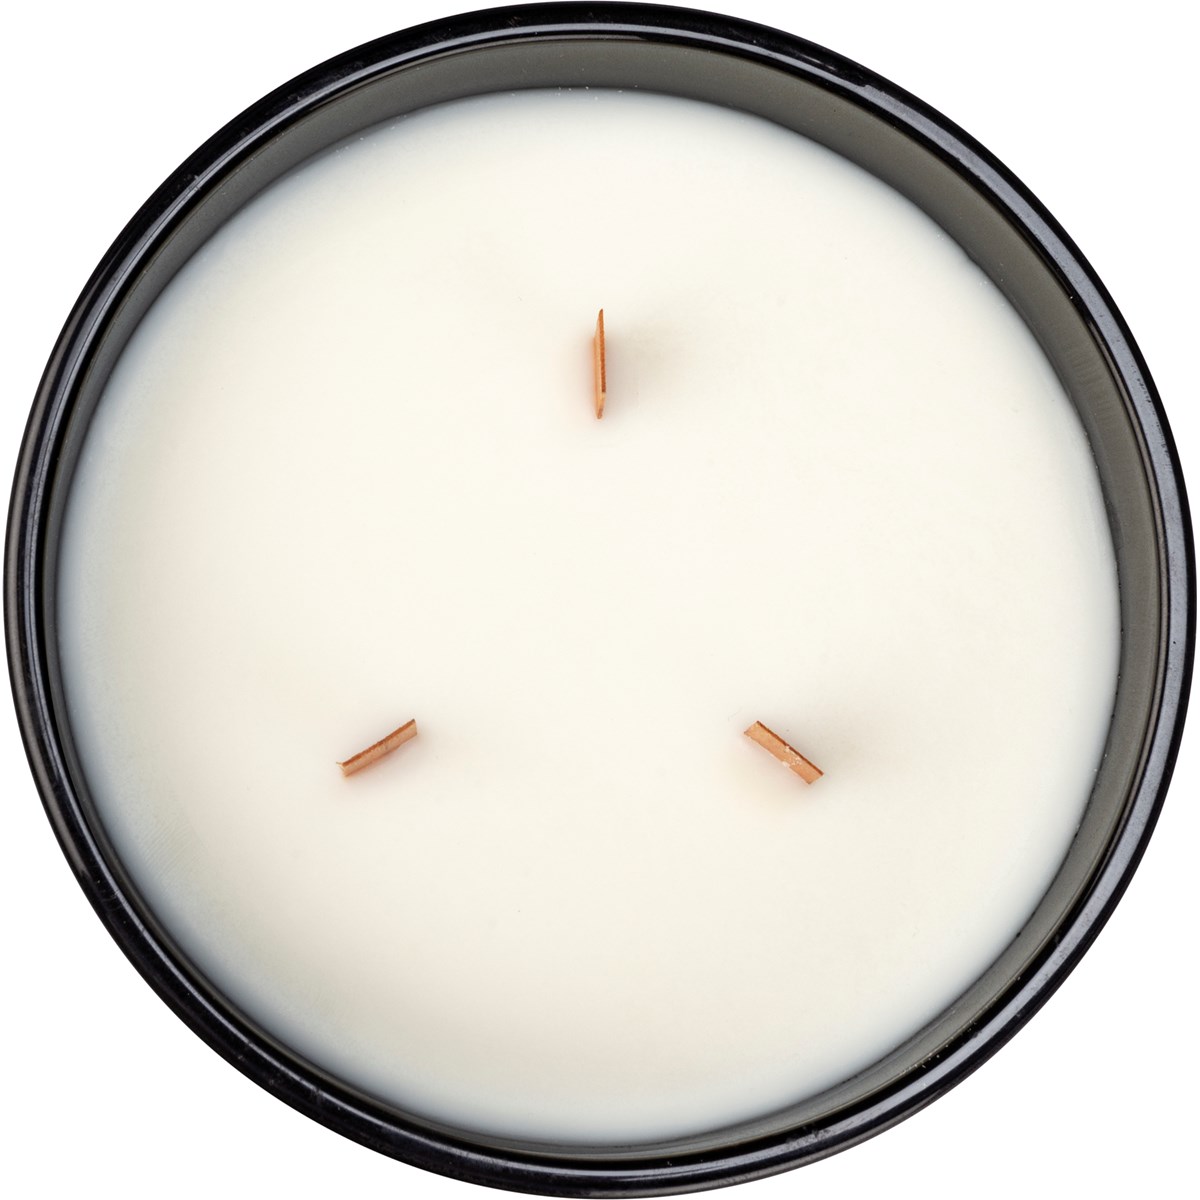 Cat Lady Candle - Soy Wax, Glass, Wood